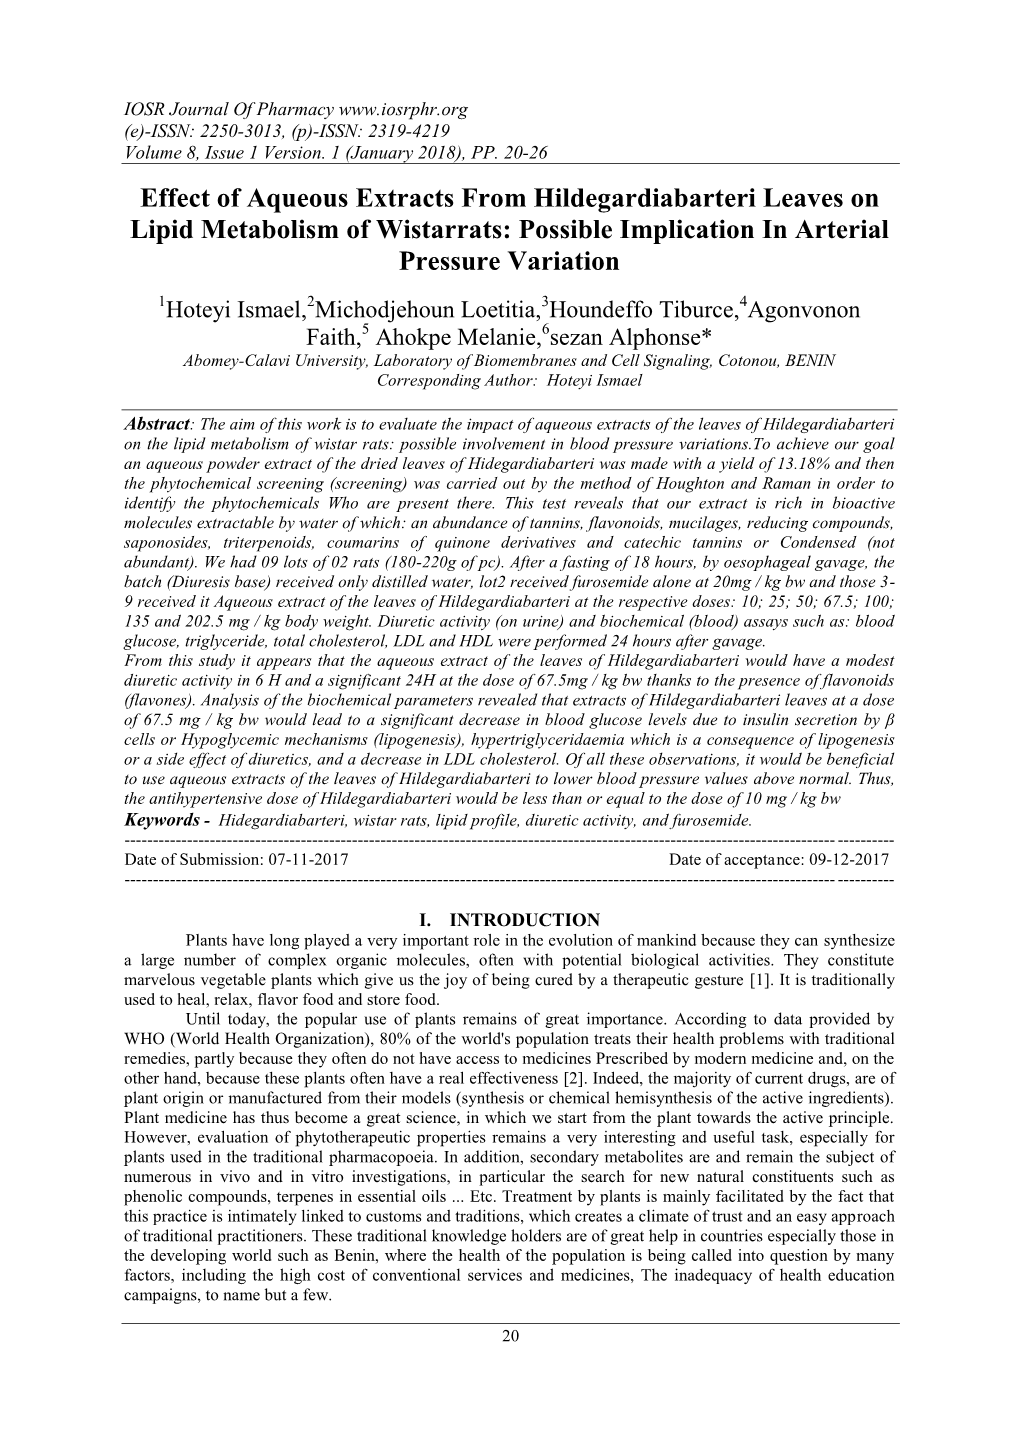 Effect of Aqueous Extracts from Hildegardiabarteri Leaves on Lipid Metabolism of Wistarrats: Possible Implication in Arterial Pressure Variation